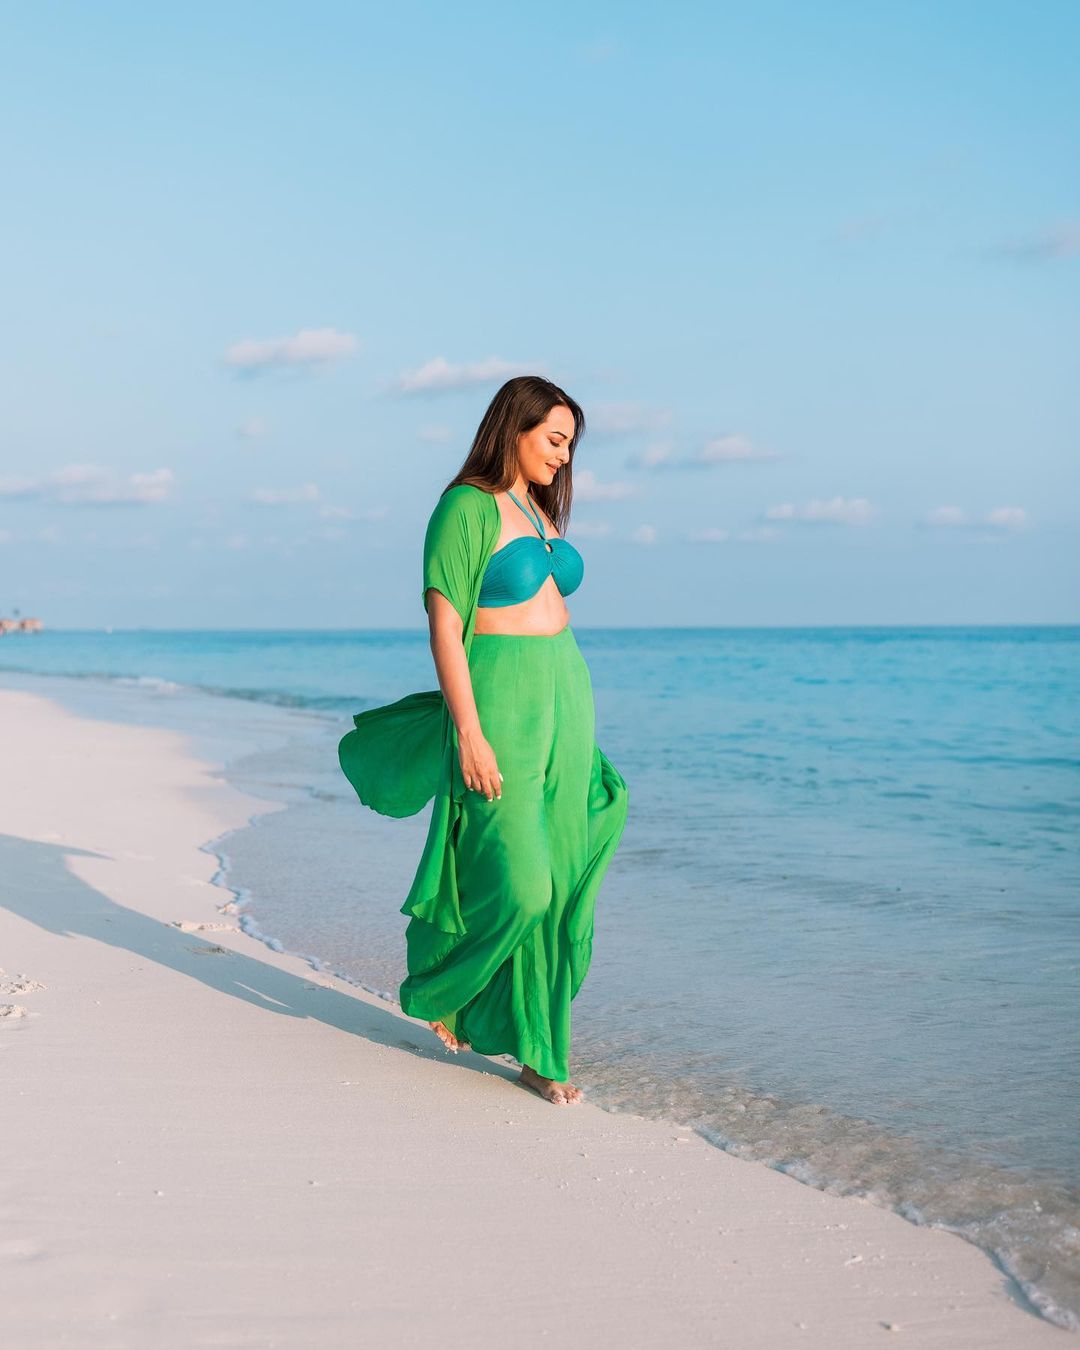 Sonakshi Sinha takes a walk on the beach in a green co-ord set